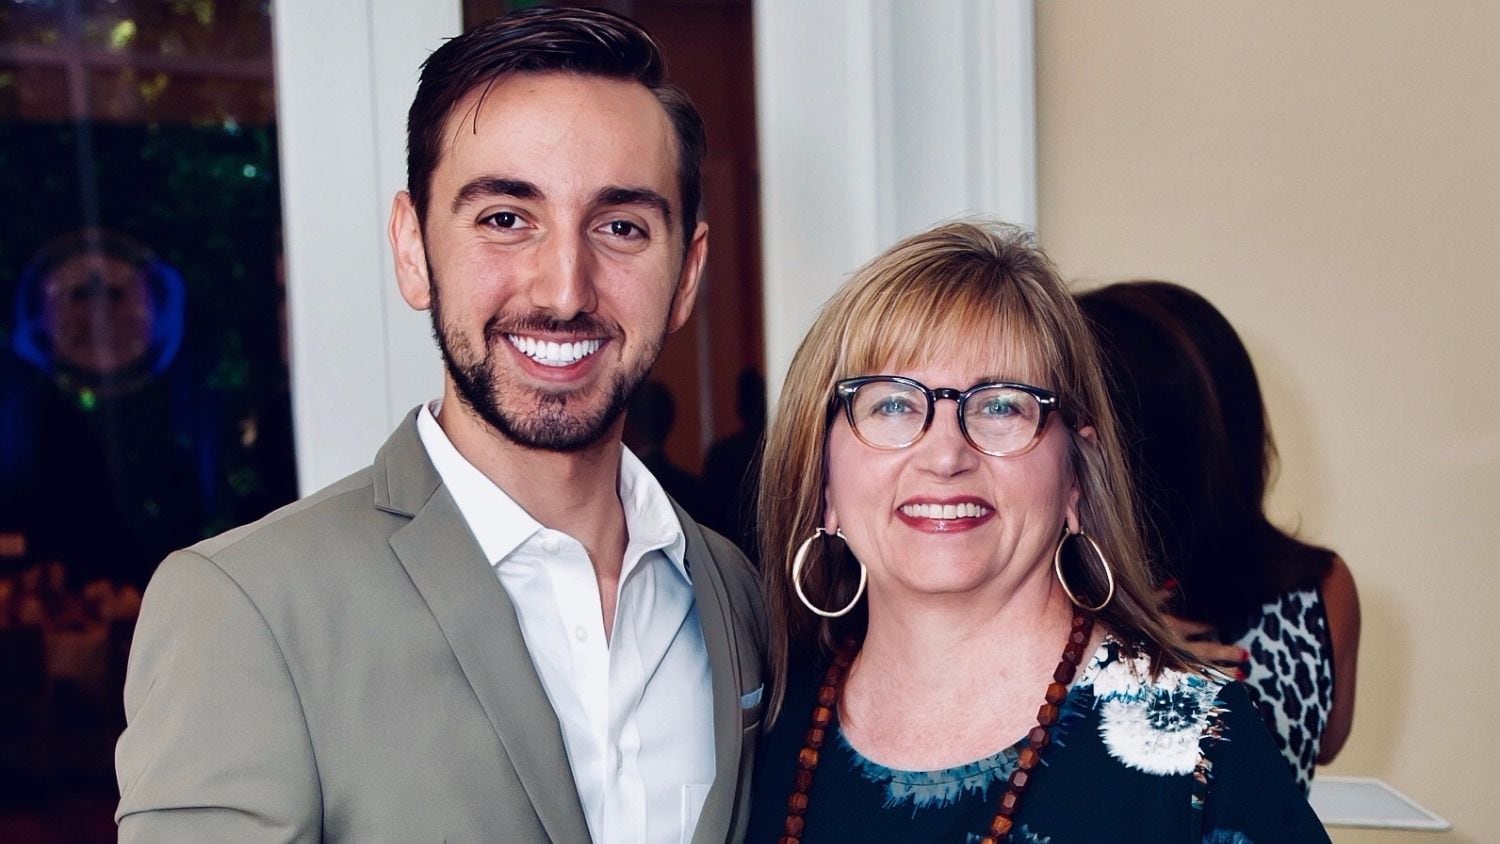 Something Good Consulting Group was founded by Michelle Riddell and her son, Tyler, to help well-intentioned businesses give back in ways that are more than an afterthought.